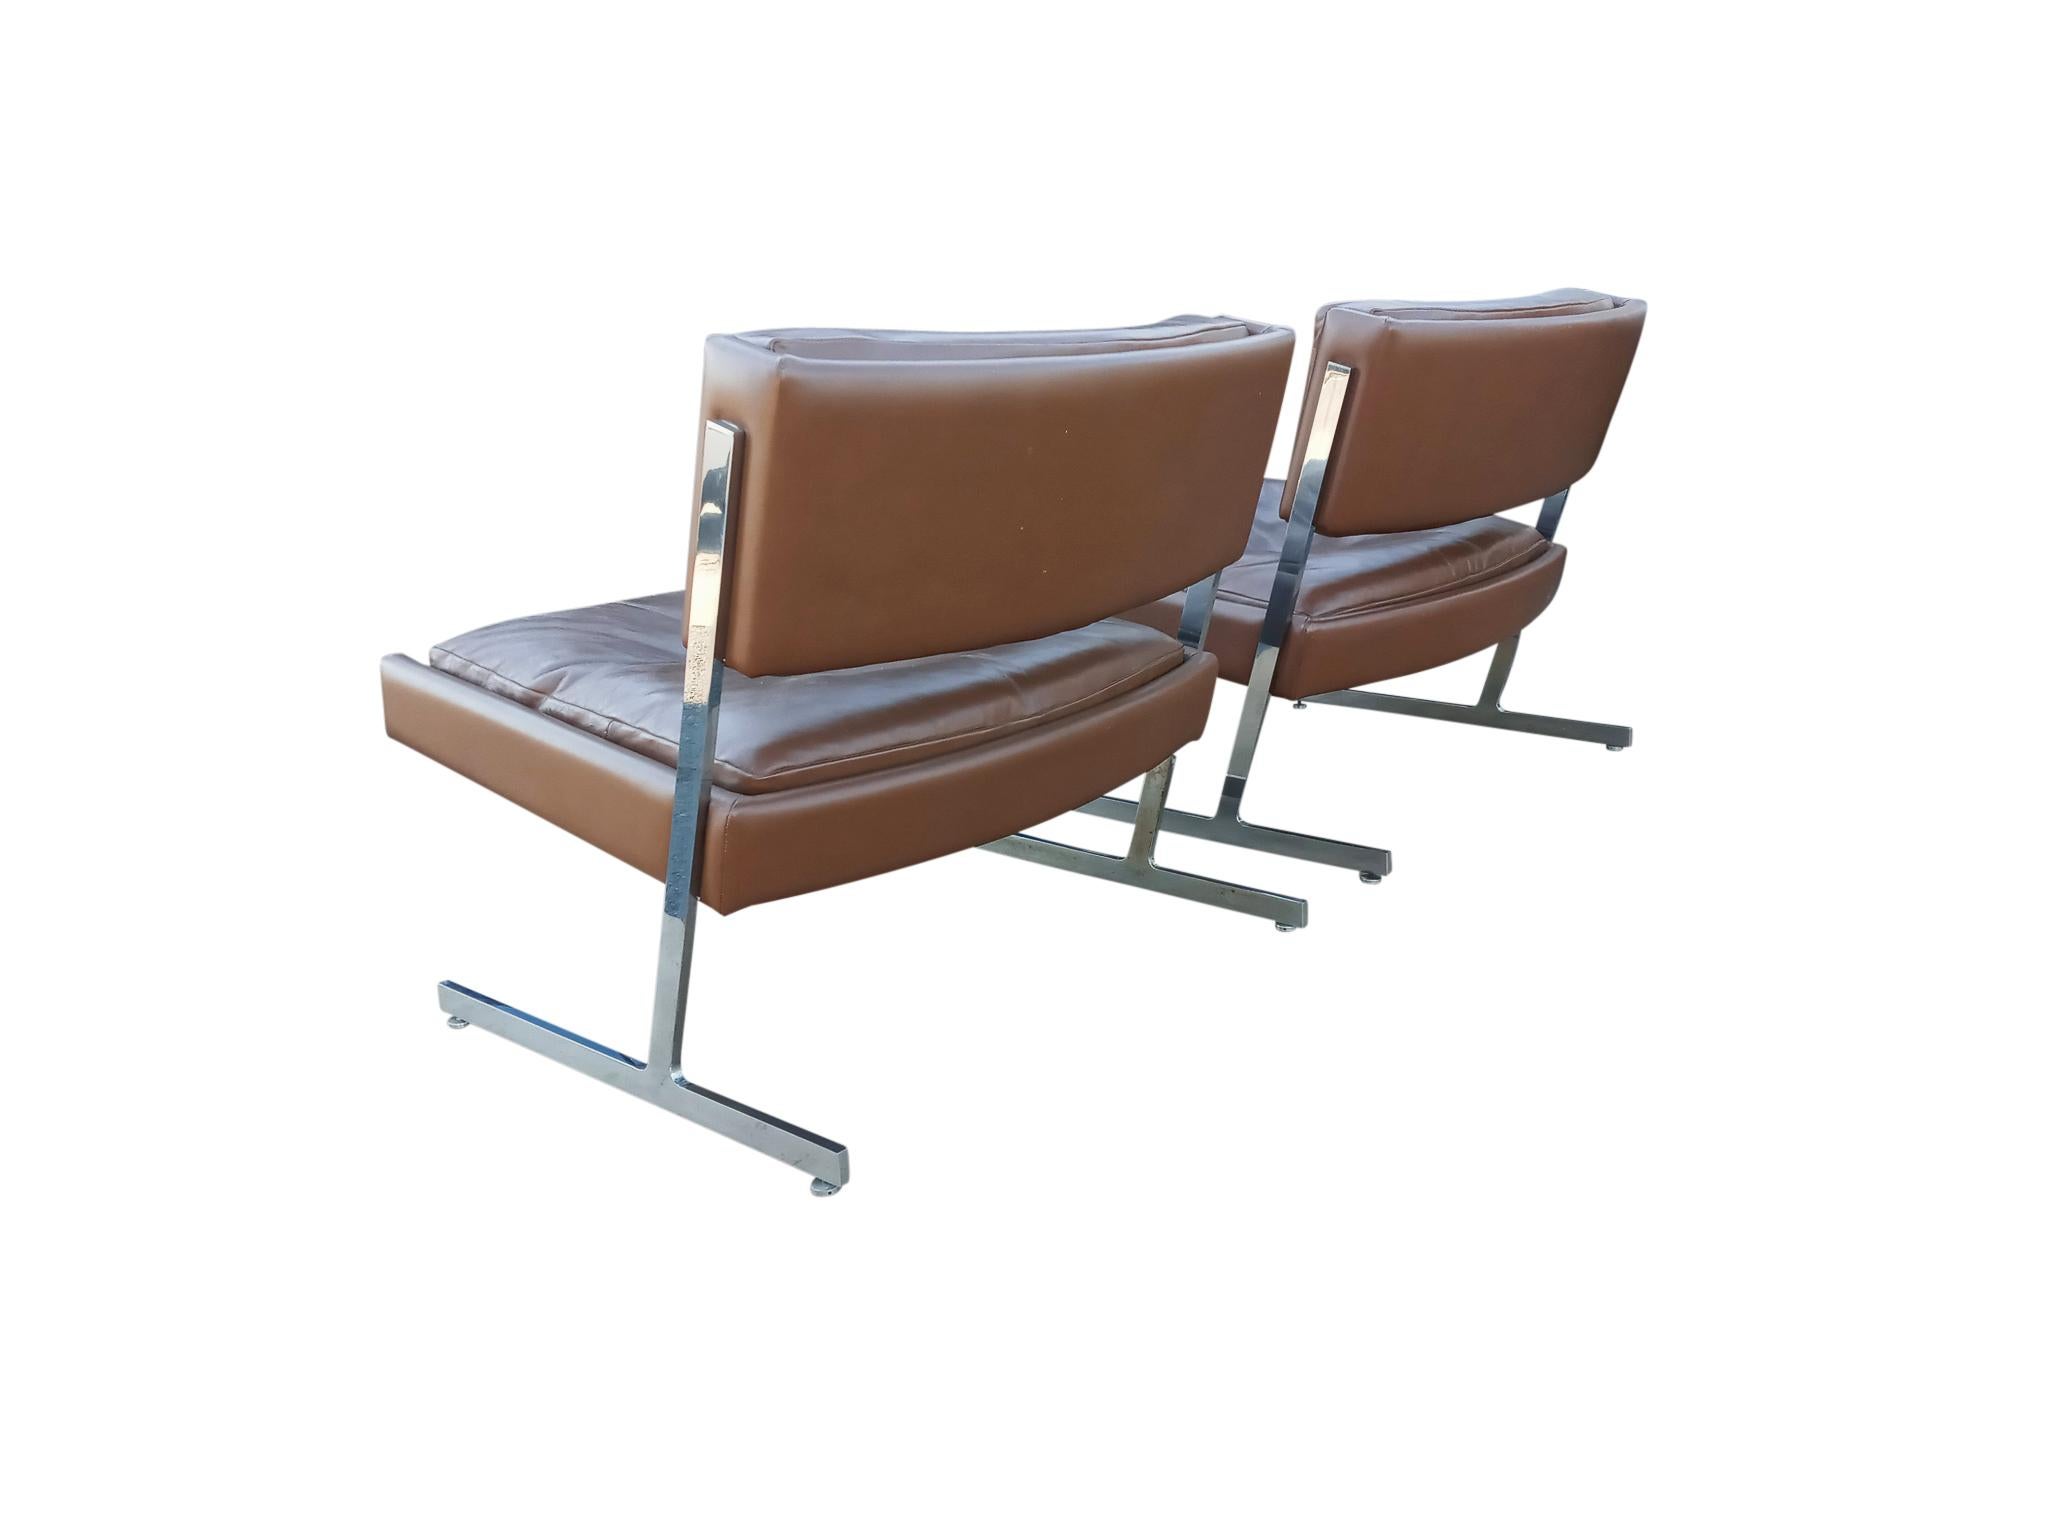 Harvey Probber Pair of Leather & Chrome Slipper Lounge Chairs Cantilevered Seats In Good Condition For Sale In Philadelphia, PA